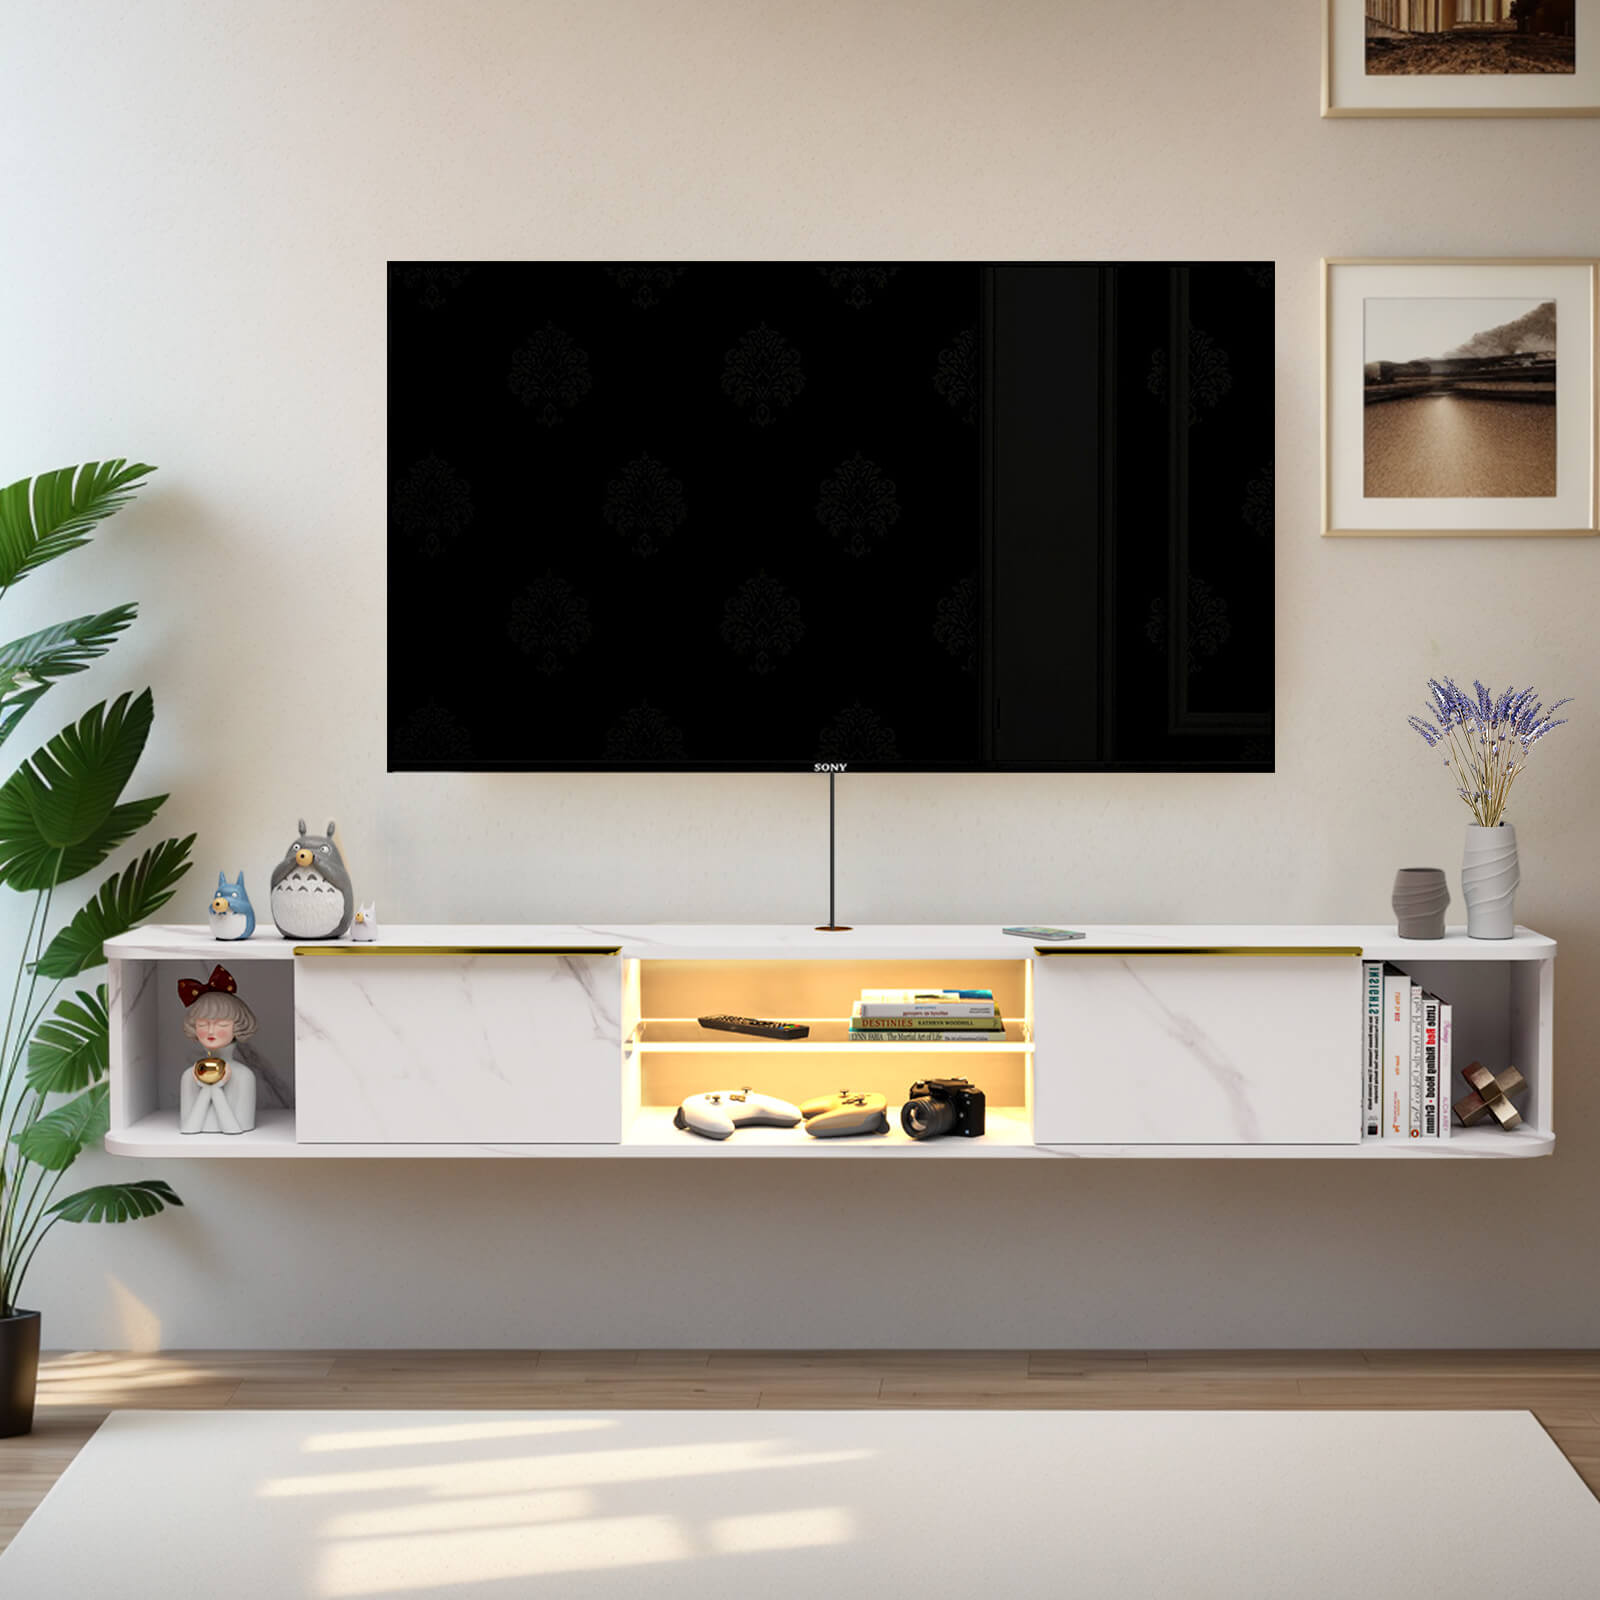 63" Plywood Floating TV Stand Media Wall Shelf with LED Lights for 65" 70" TVs, White